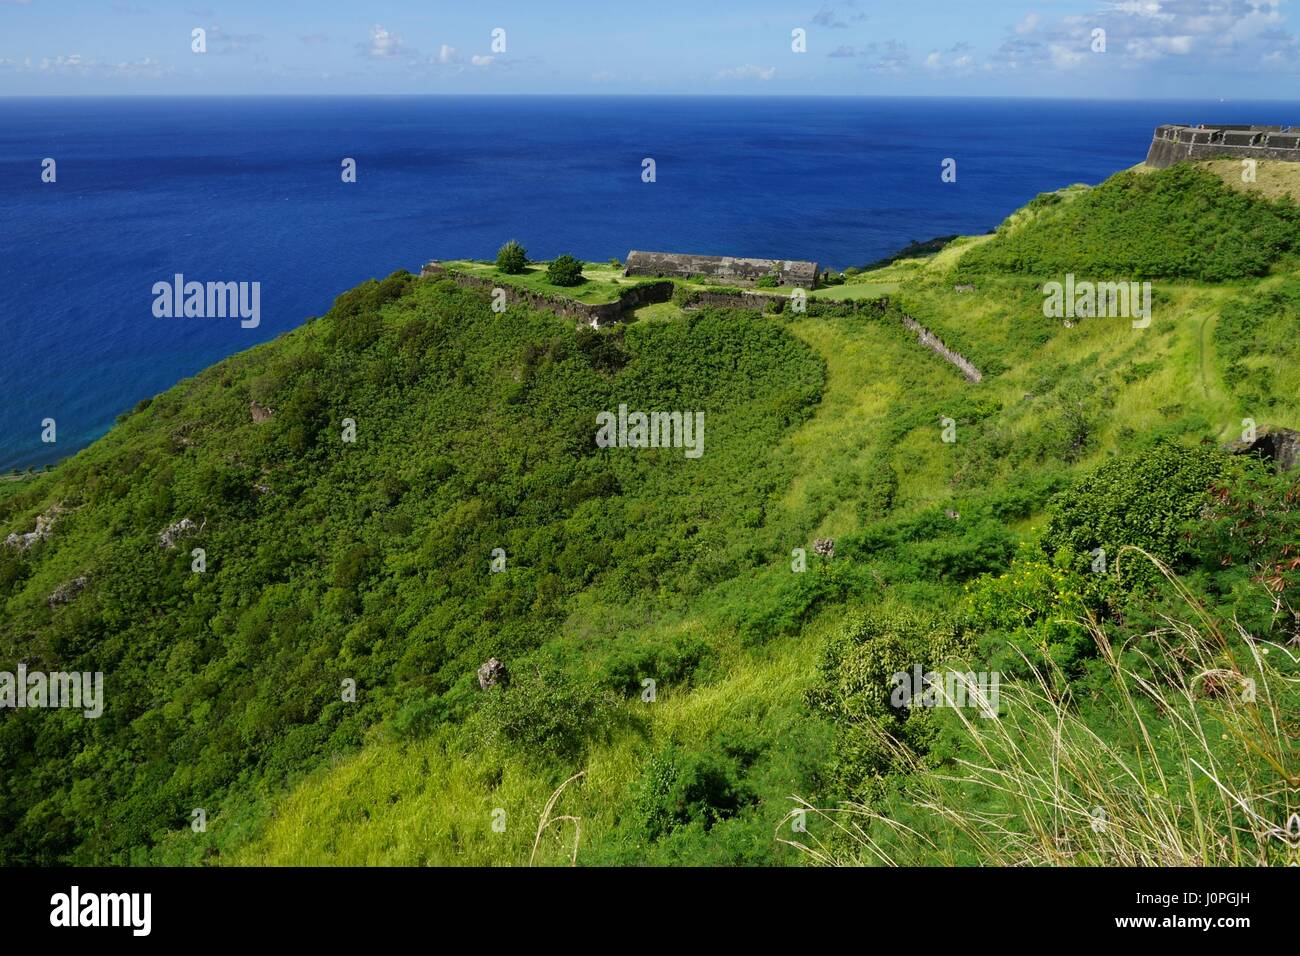 Brimstone Hill Fortress National Park, buildings in a bright sunshine, Saint Kitts and Nevis. Stock Photo